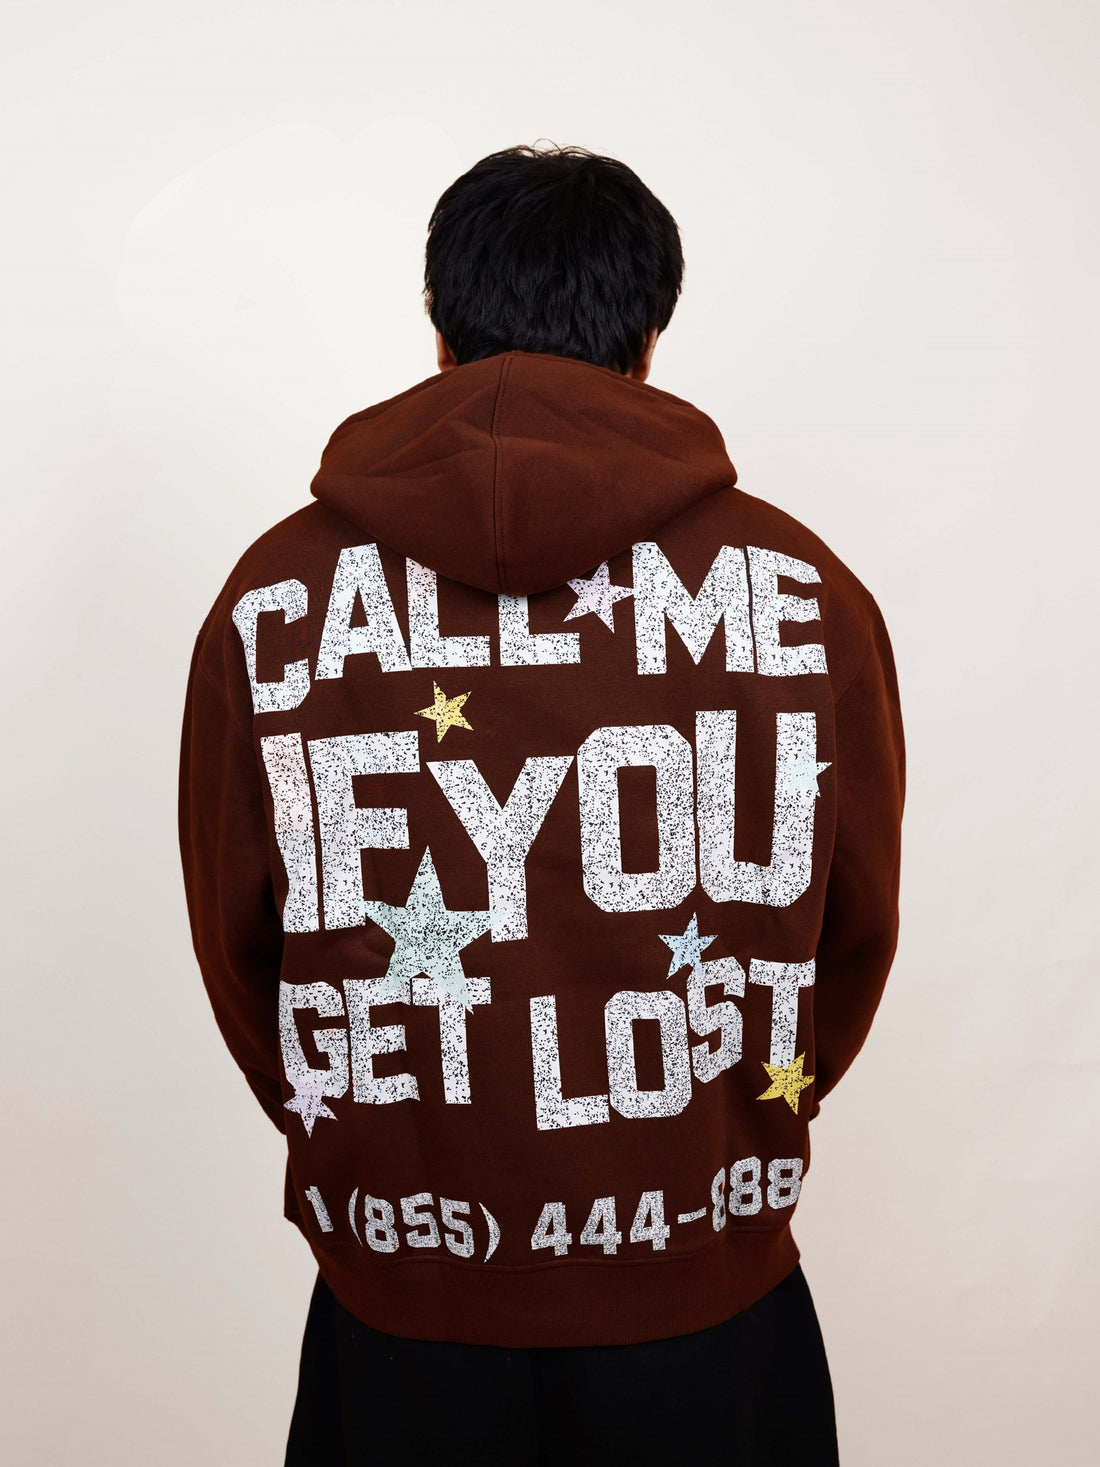 Call Me If You Get lost - Tyler the Creator Heavyweight Baggy Hoodie For Men and Women